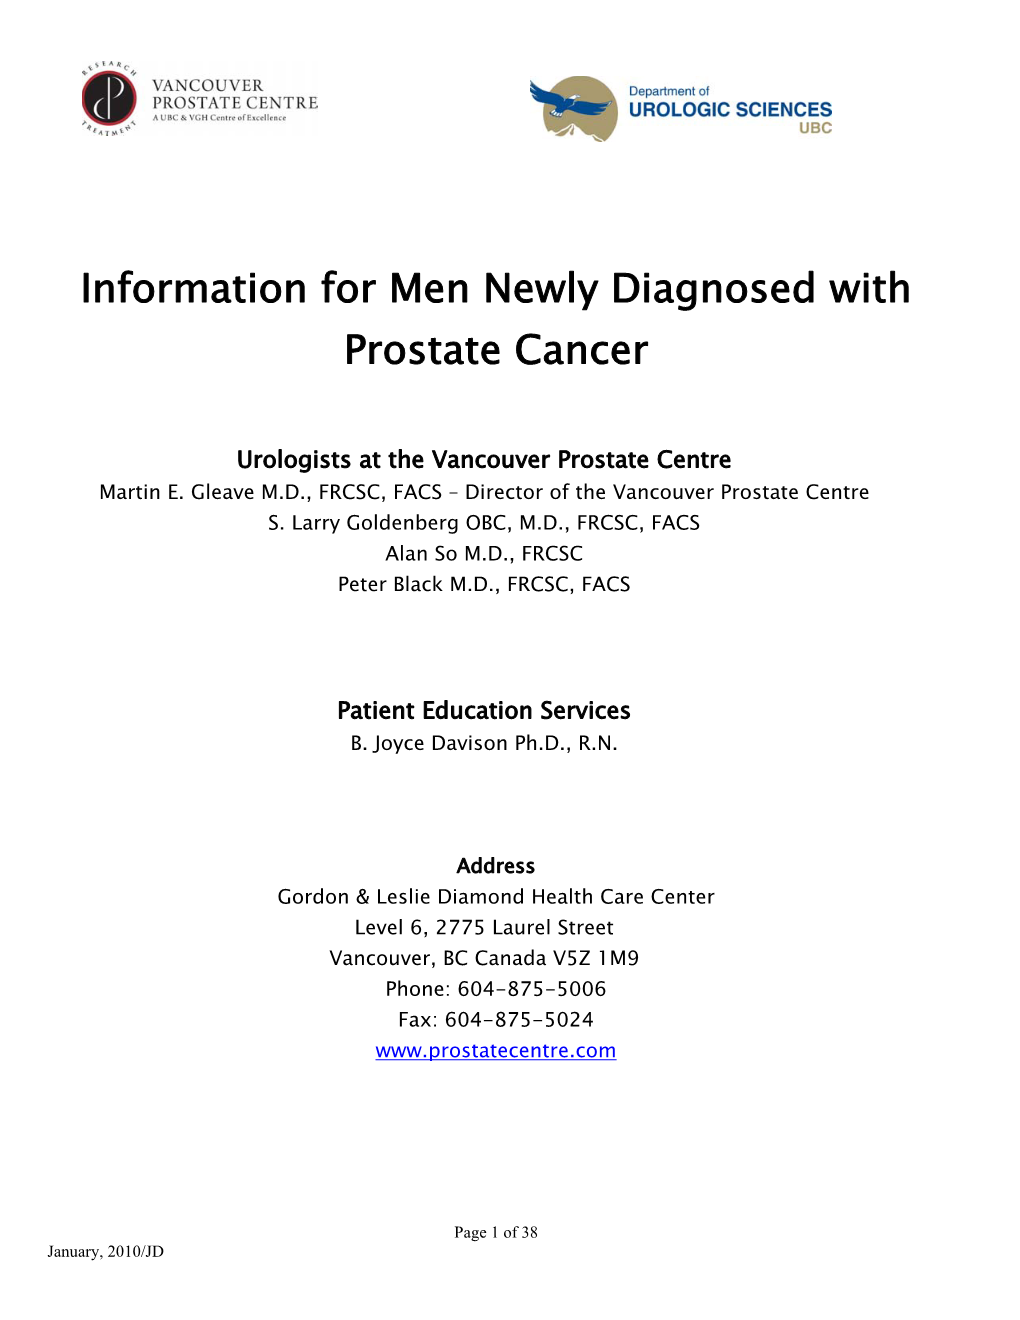 Information for Men Newly Diagnosed with Prostate Cancer